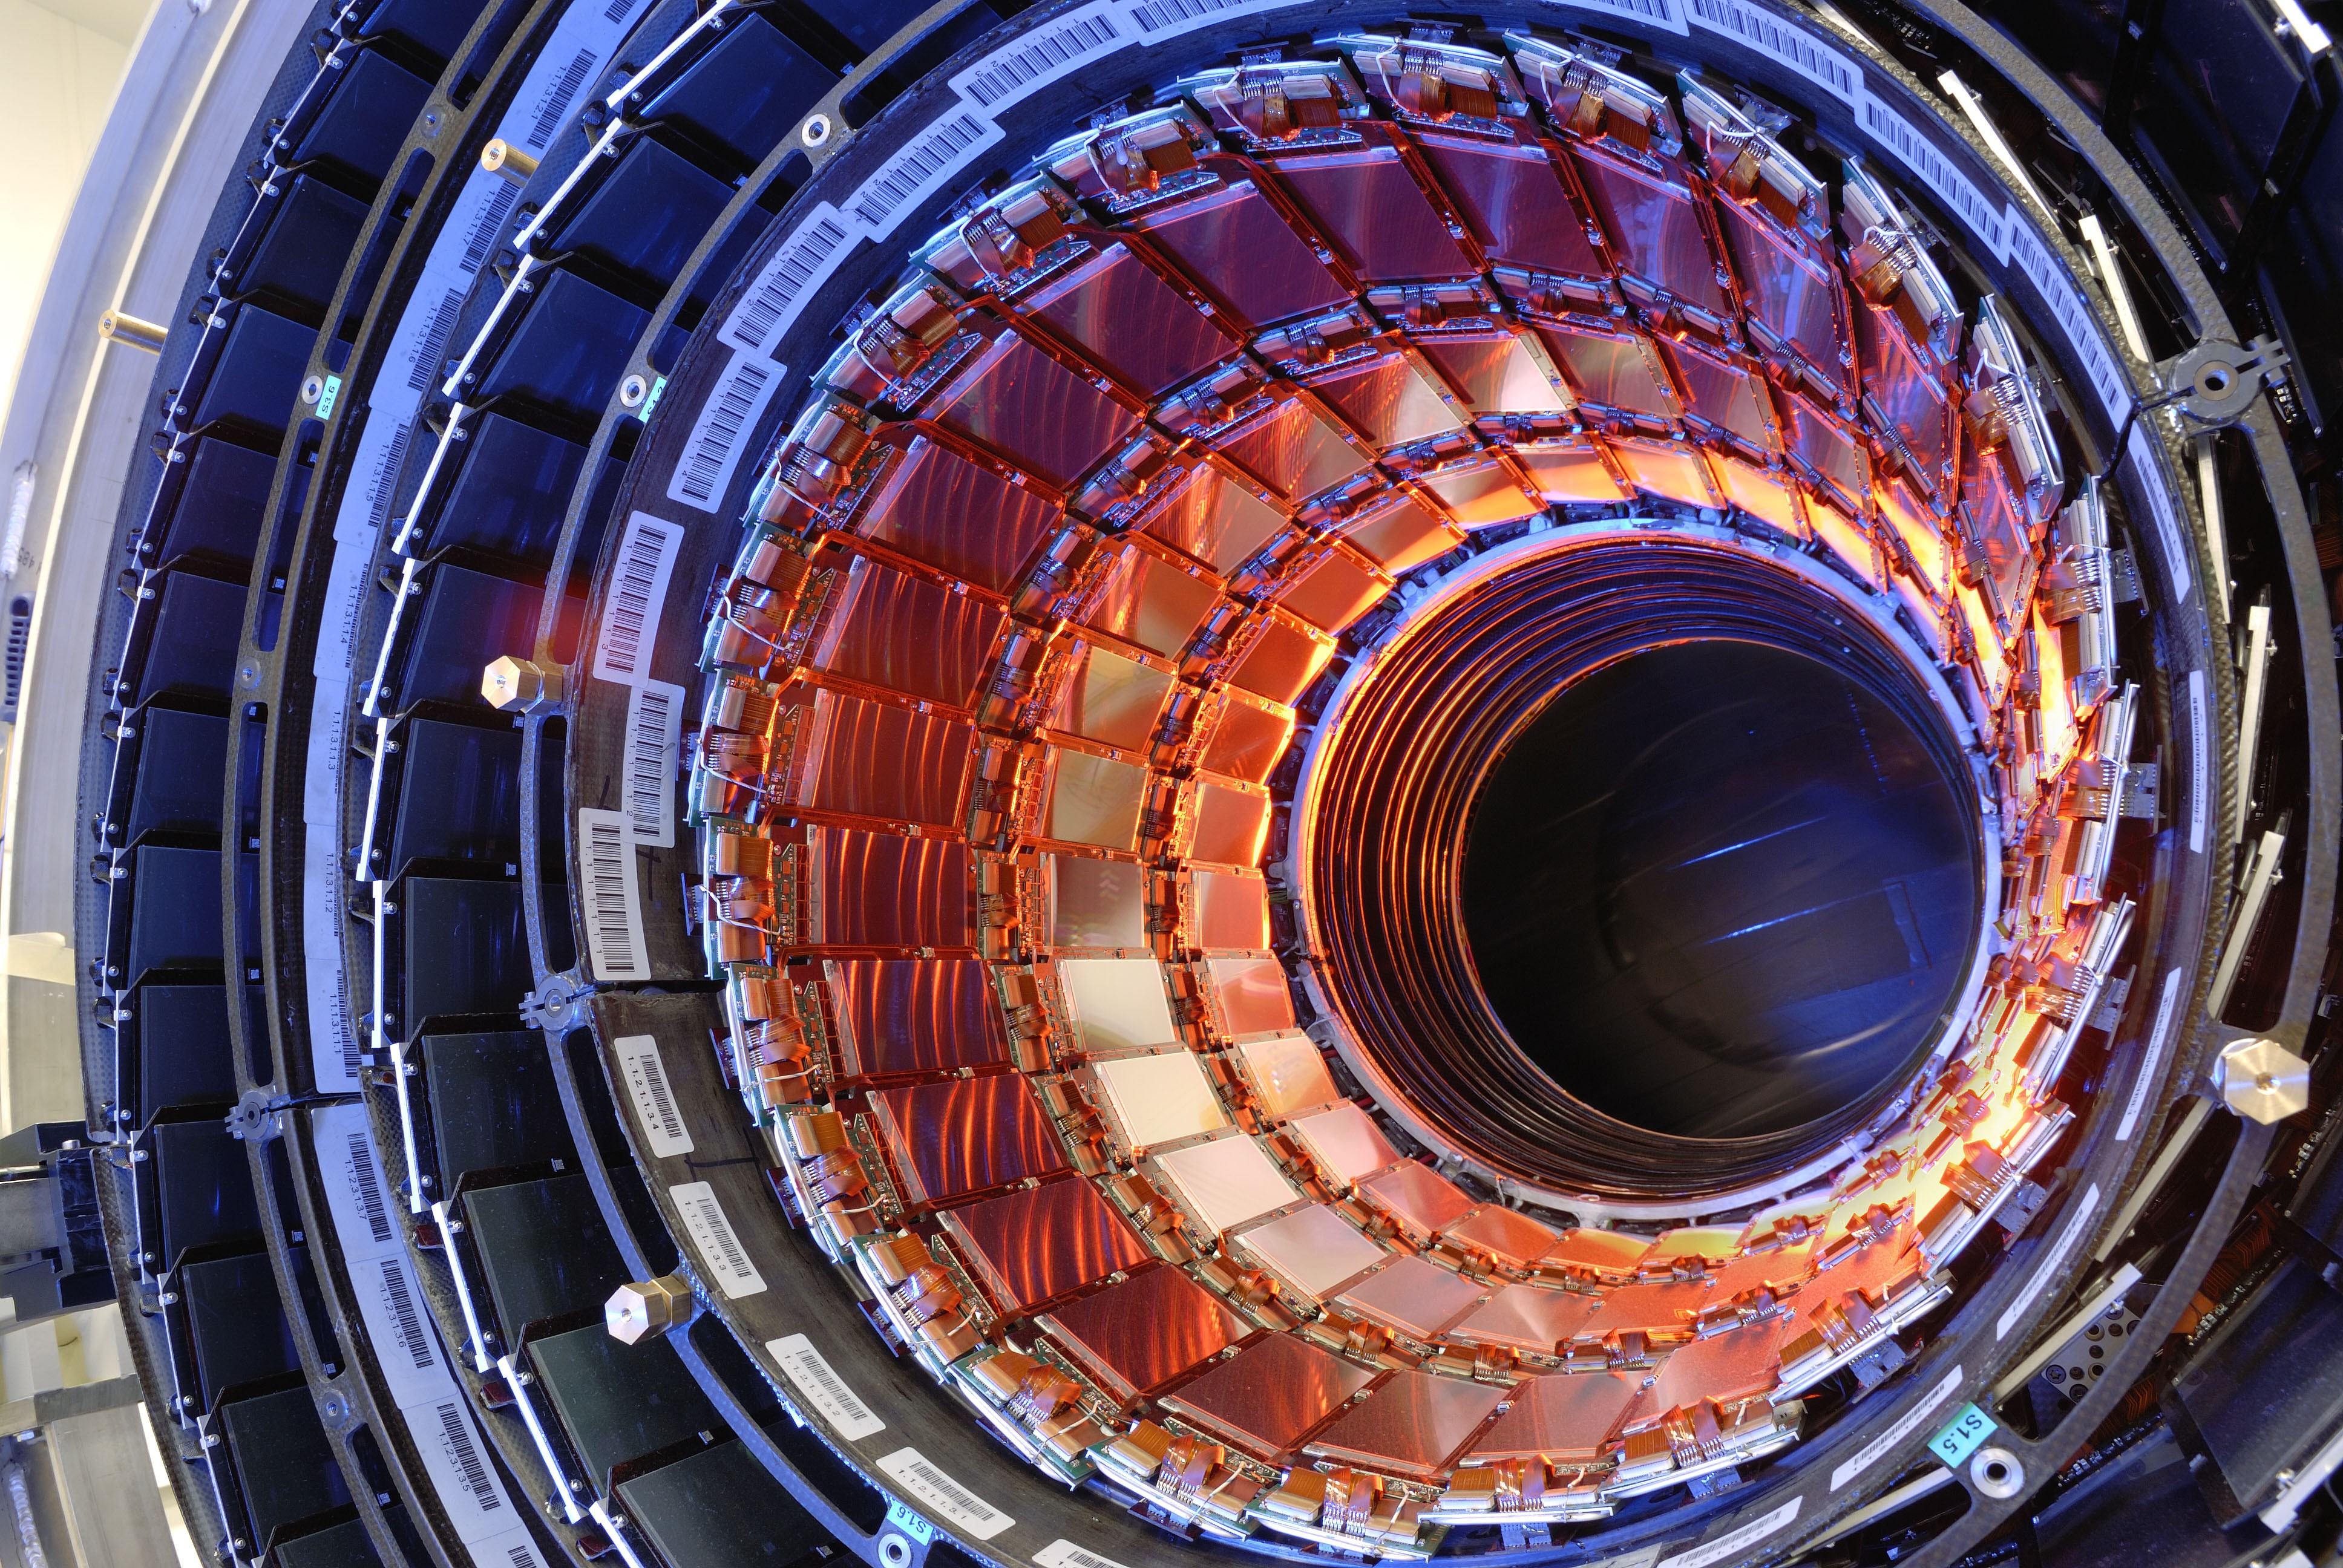 General 3872x2592 Large Hadron Collider machine science technology